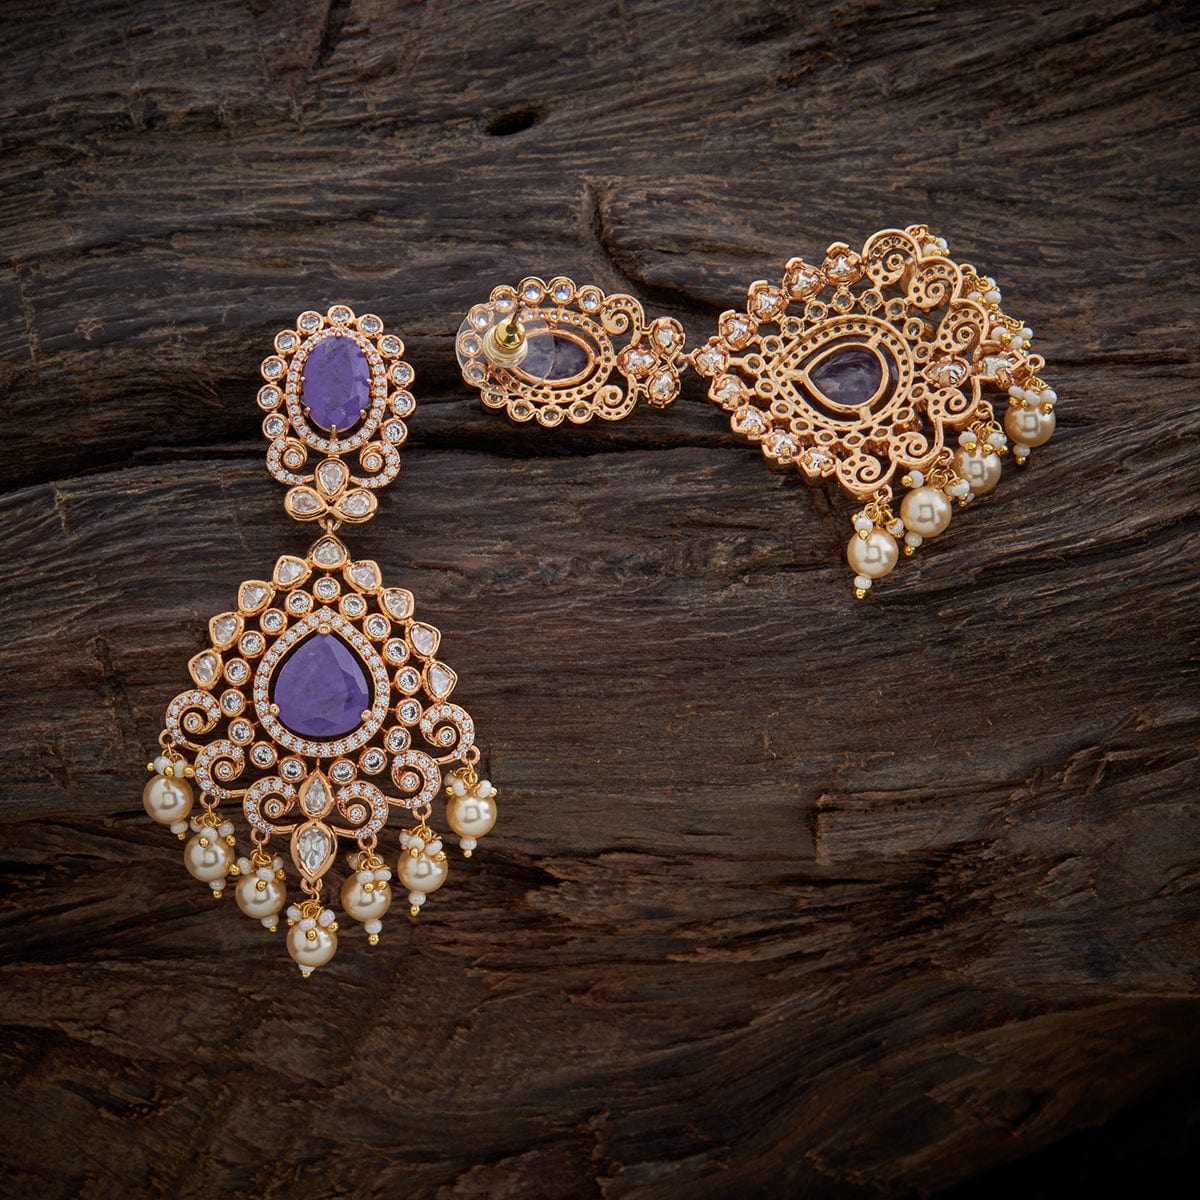 Buy quality Gorgeous gold jhumka earrings for women in Pune